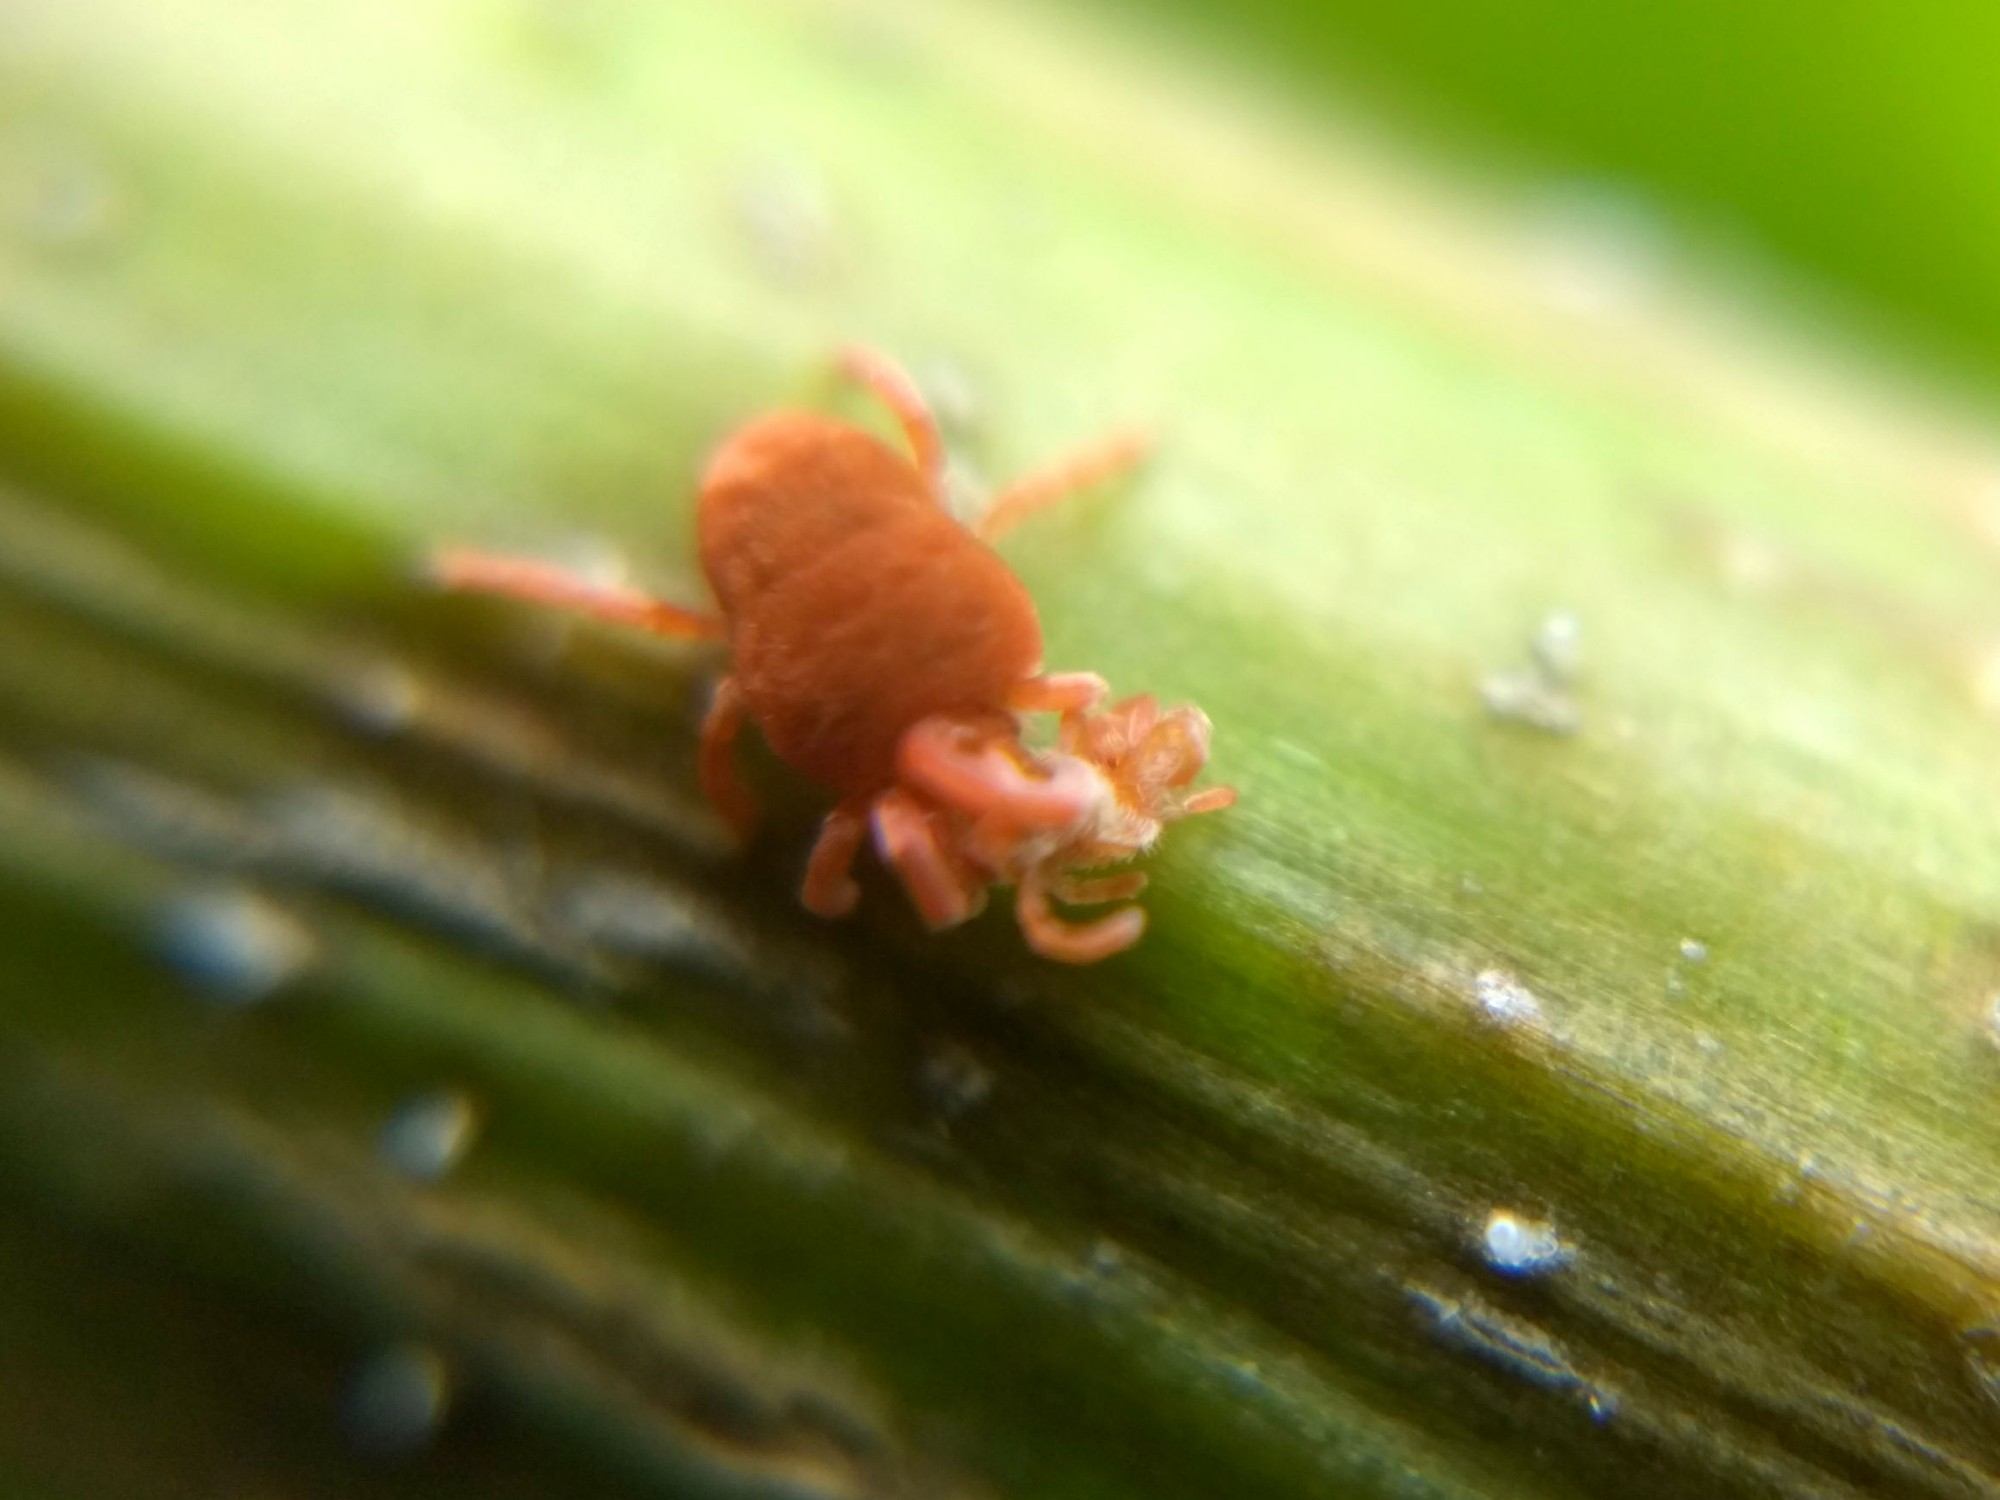 Closer view of red velvet mite. It's clutching a smaller red velvet mite in its mouthparts.